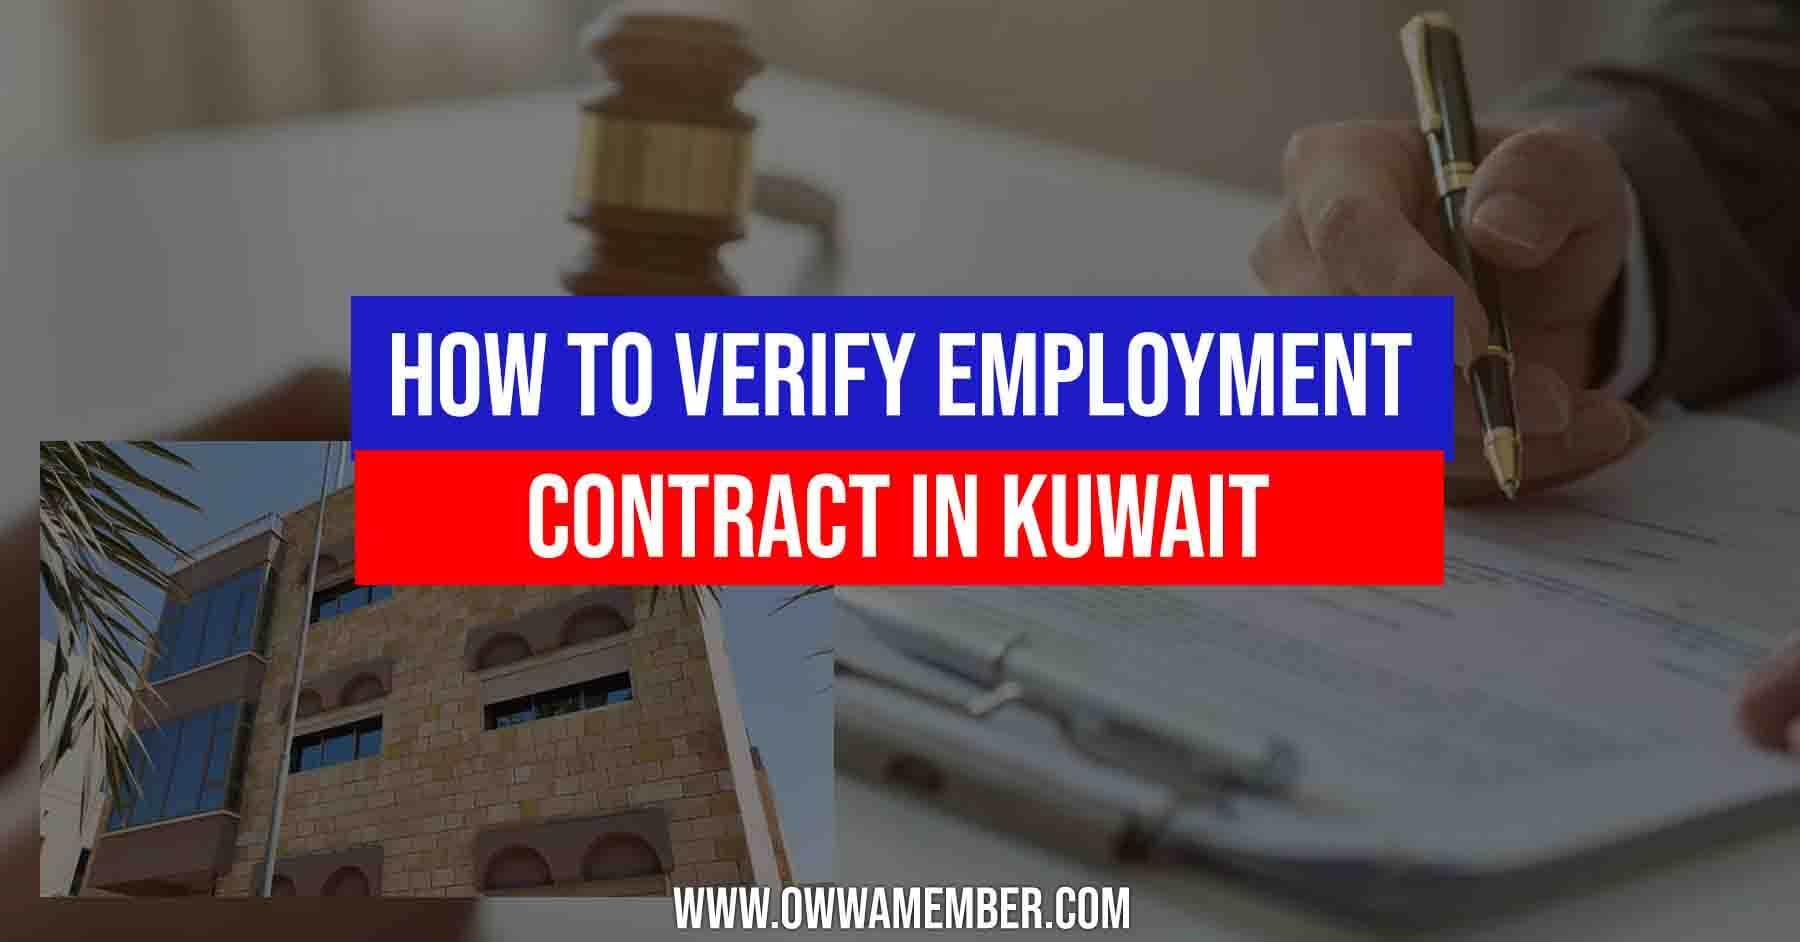 contract verification process in kuwait